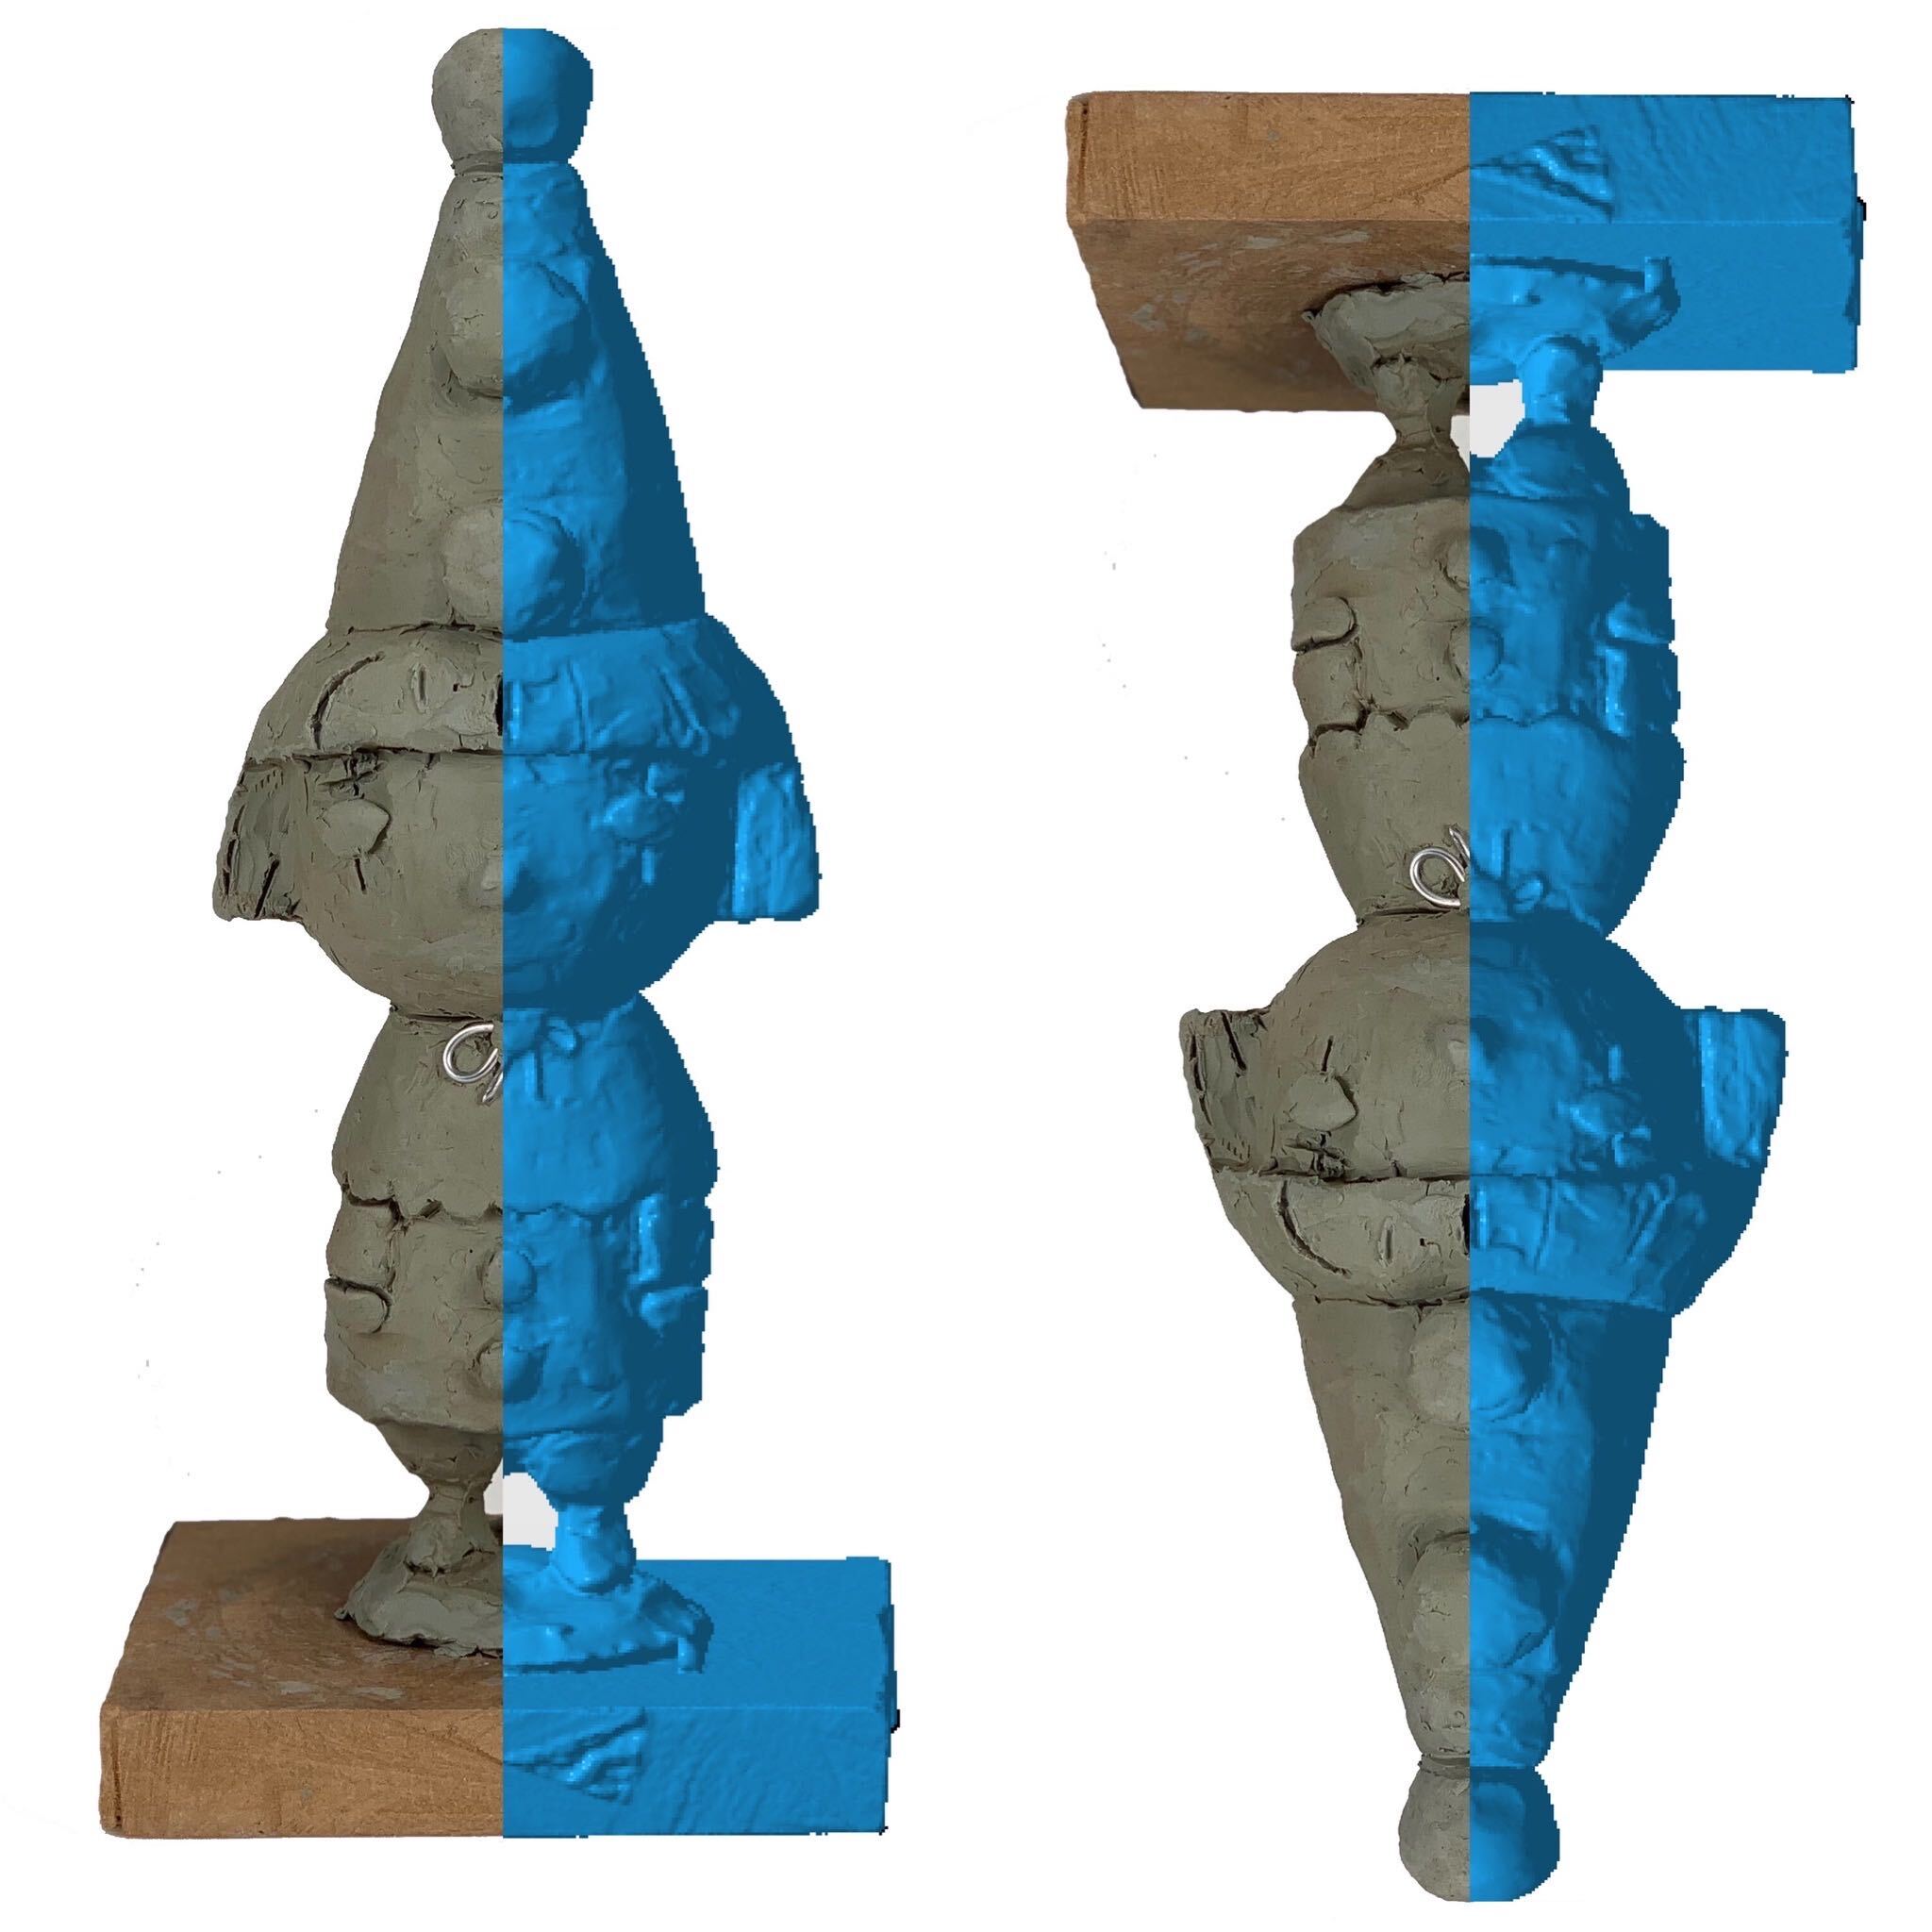 3d scan a clay sculpture to produce an accurate digital 3d model in STL file format